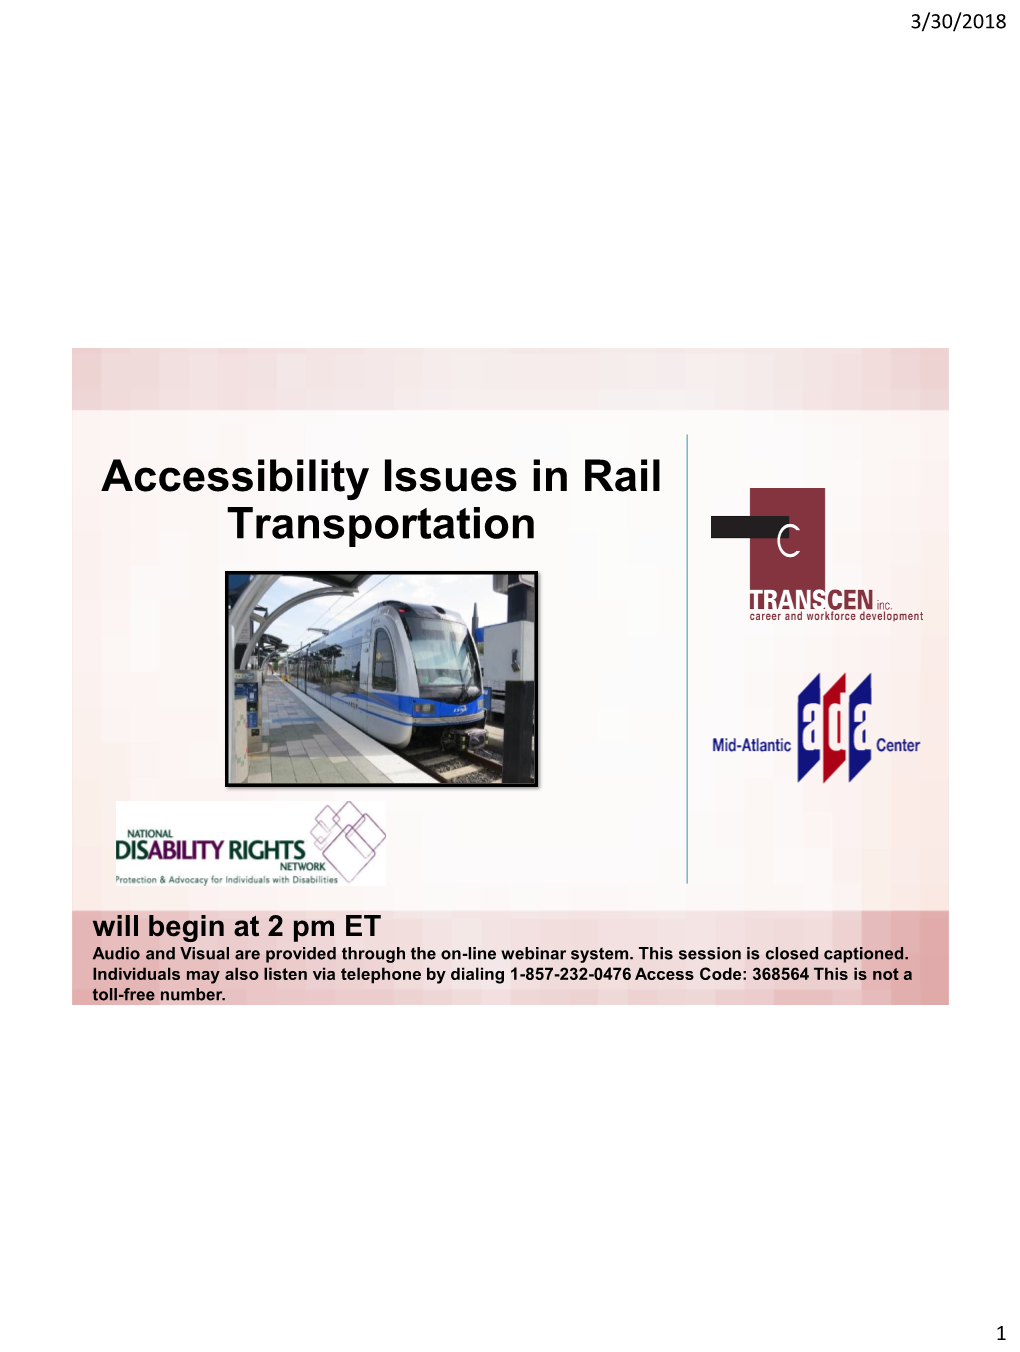 Accessibility Issues in Rail Transportation